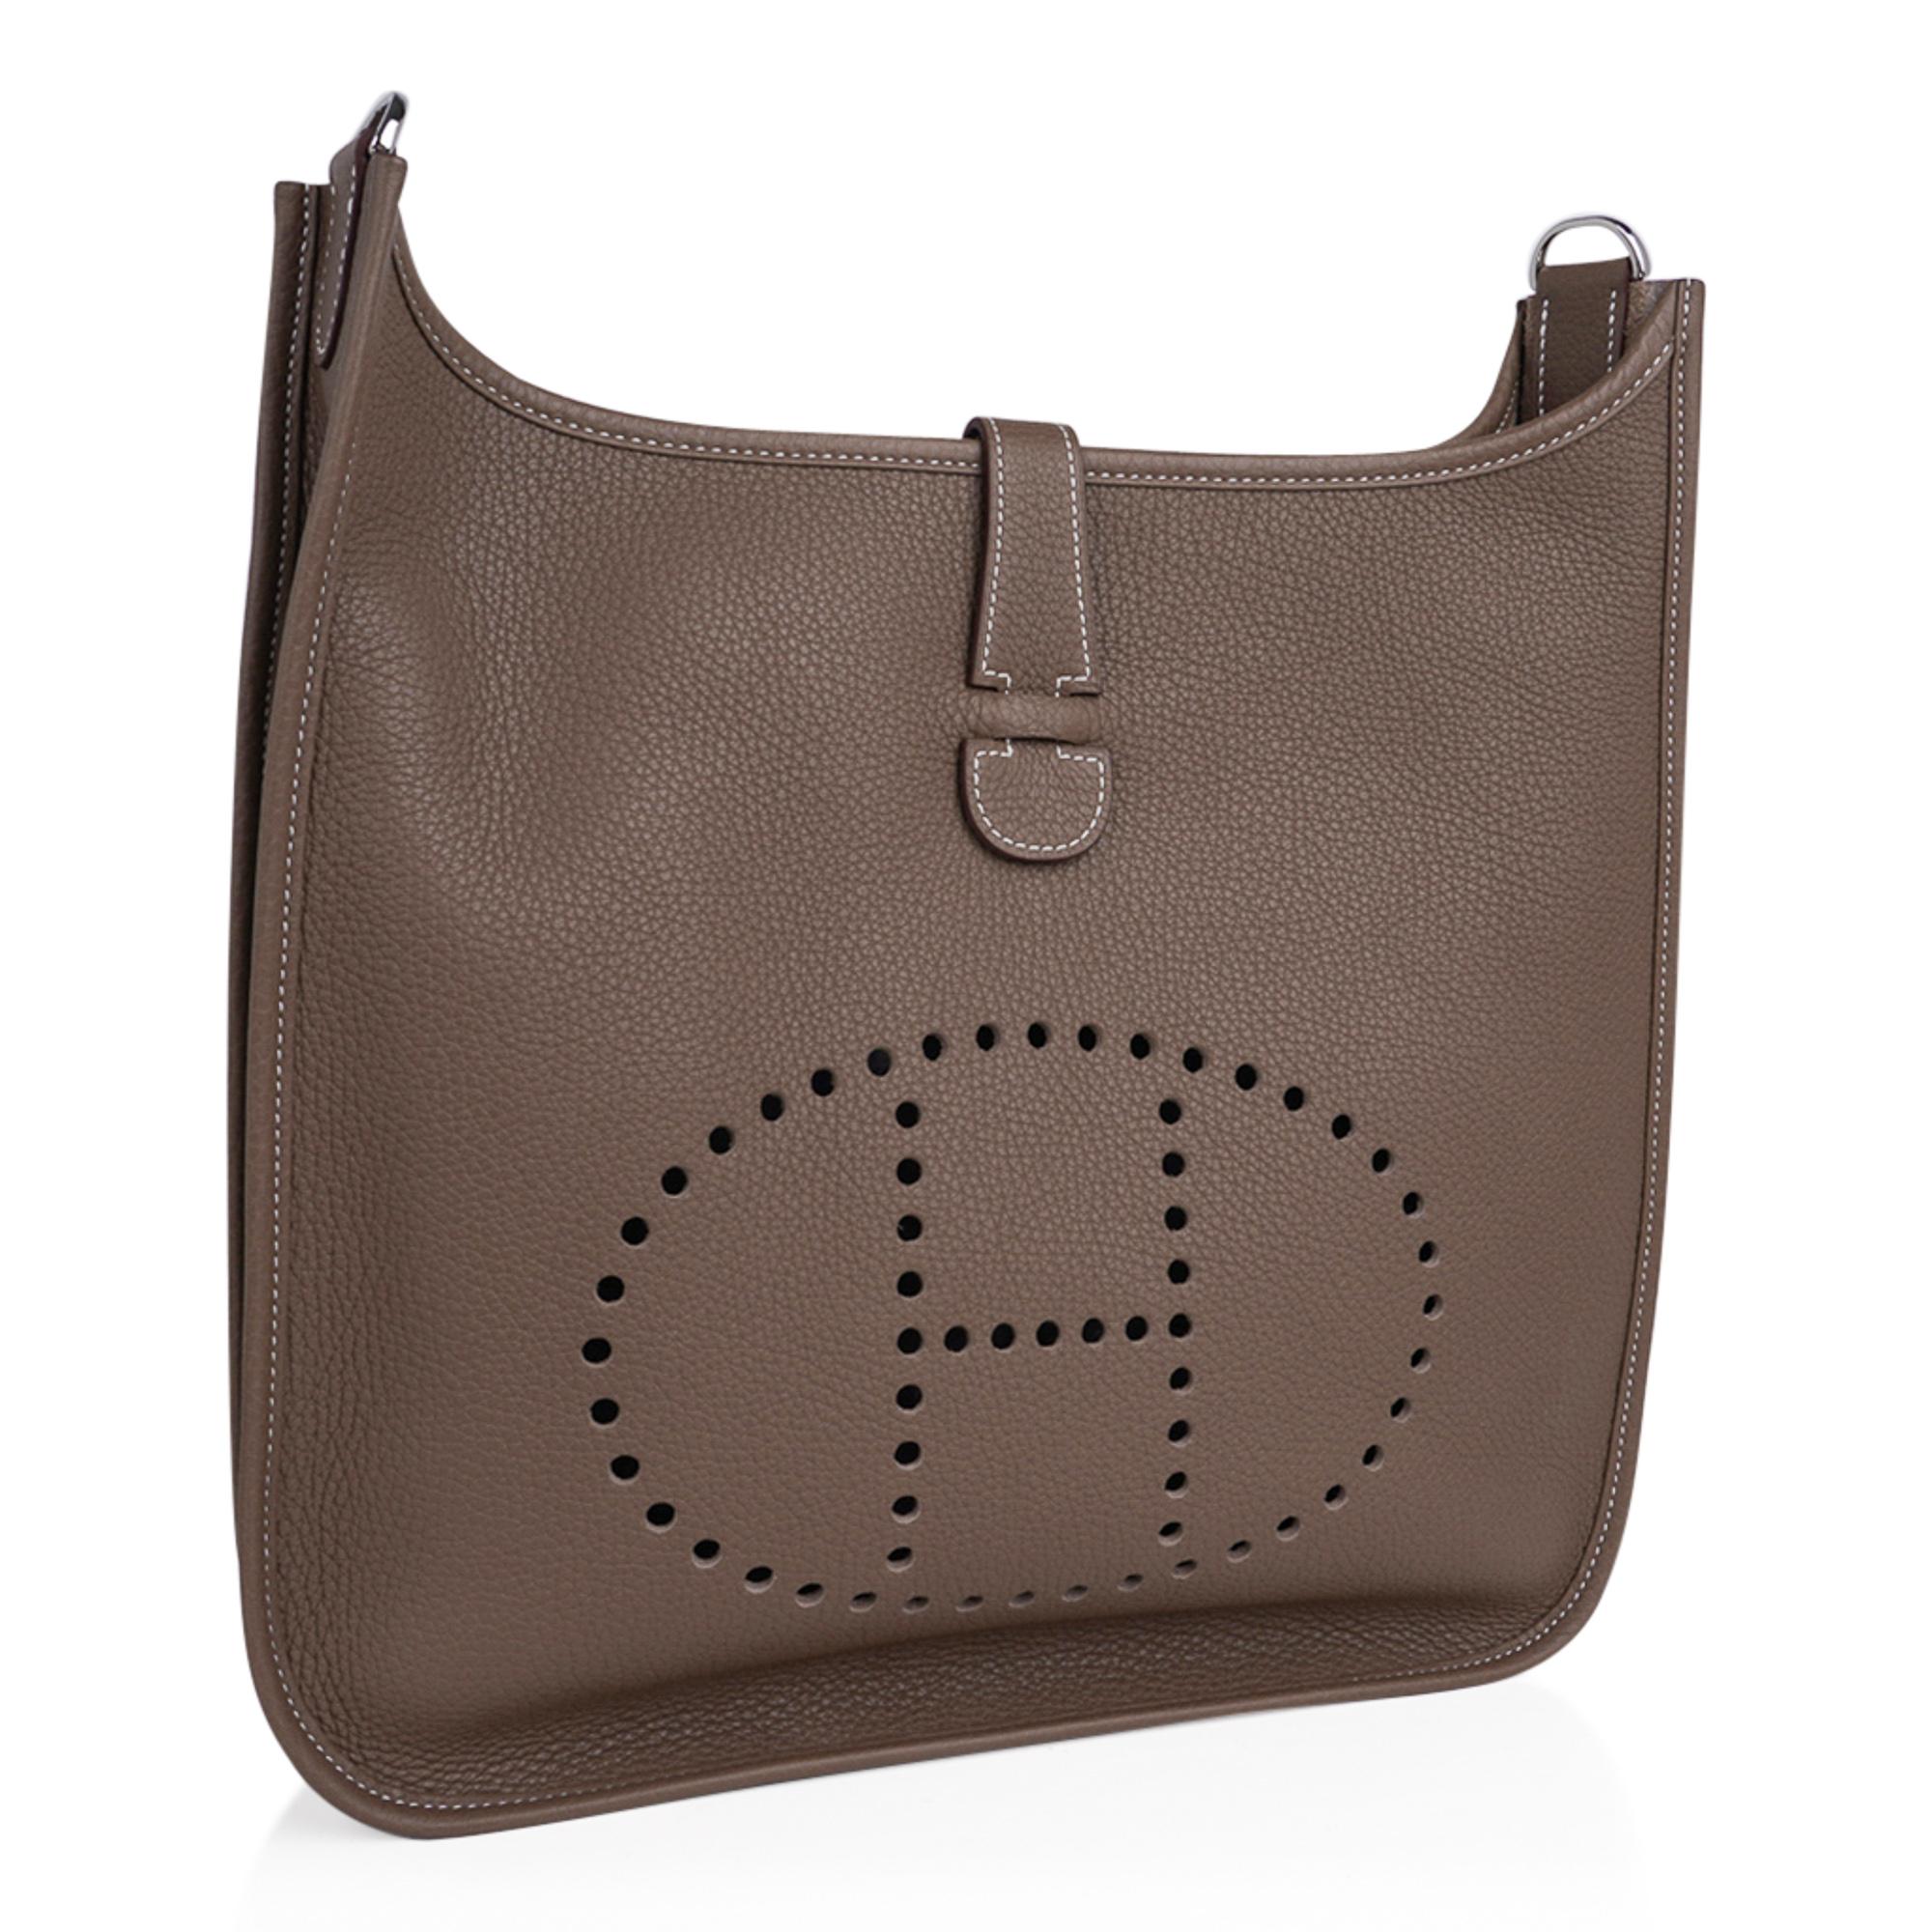 Mightychic offers an Hermes Evelyne GM featured in Etoupe clemence leather.  
Fabulous shoulder or cross body bag with roomy interior and rear outside deep pocket. 
Sport strap in textile with leather and palladium hardware details.
Signature